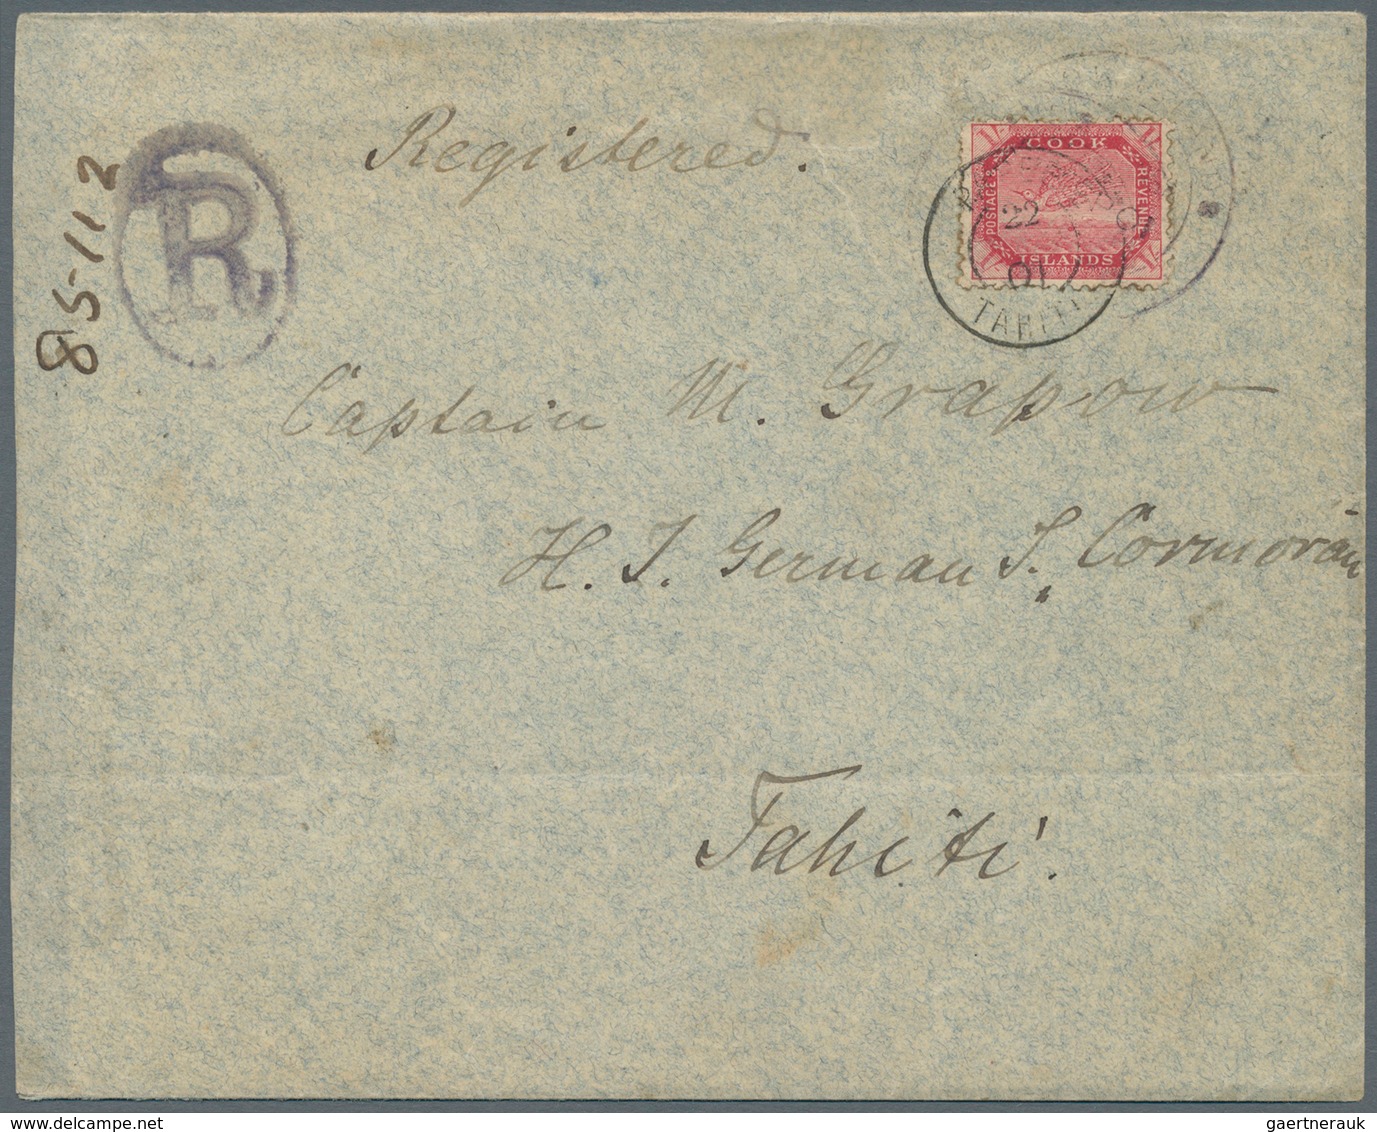 Cook-Inseln: 1901, Angel Tern 1 Sh. Carmin Tied By Cds. "COOK ISLAND...SE.01" To Registered Cover Ad - Islas Cook